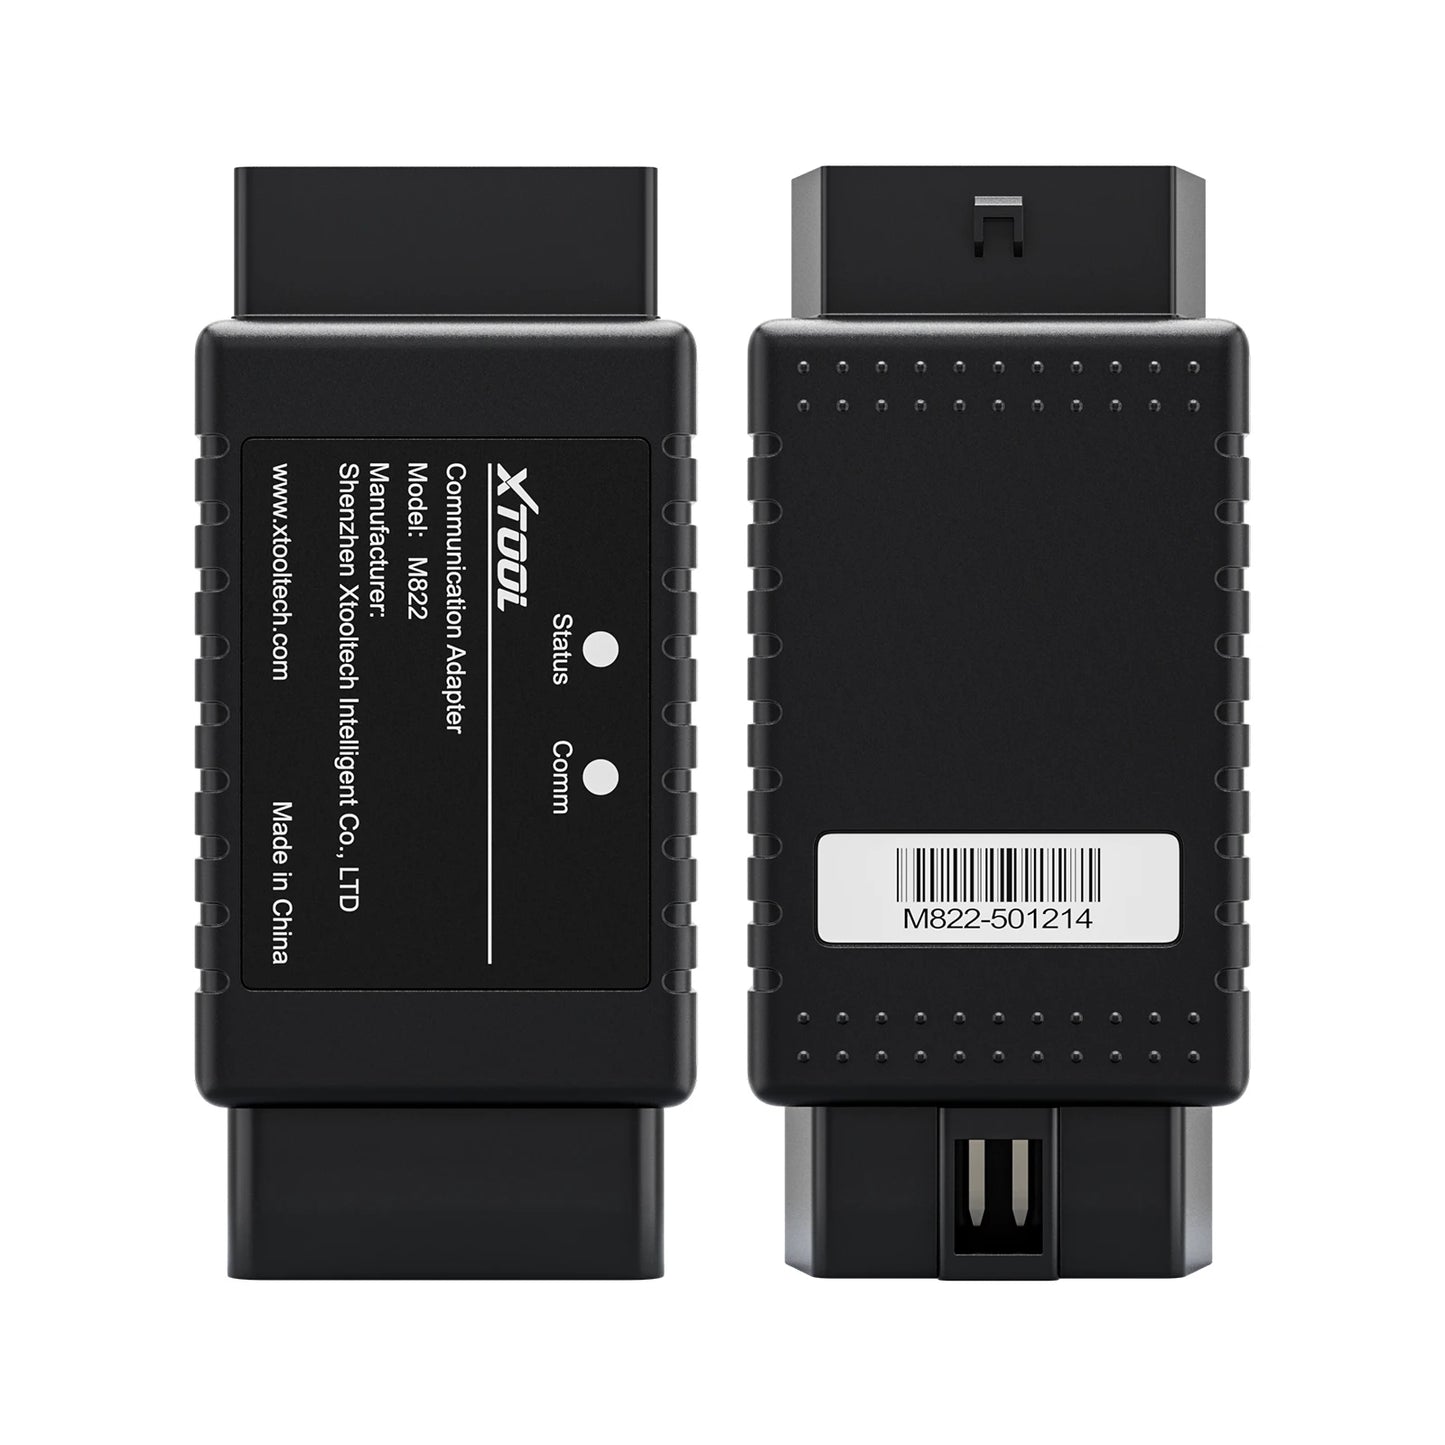 XTOOL M822 Adapter For Toyota 8A AIl Key Lost key Programming Work With KC501 Programmer X100MAX X100PAD3 A80 D9PRO - Dynamex